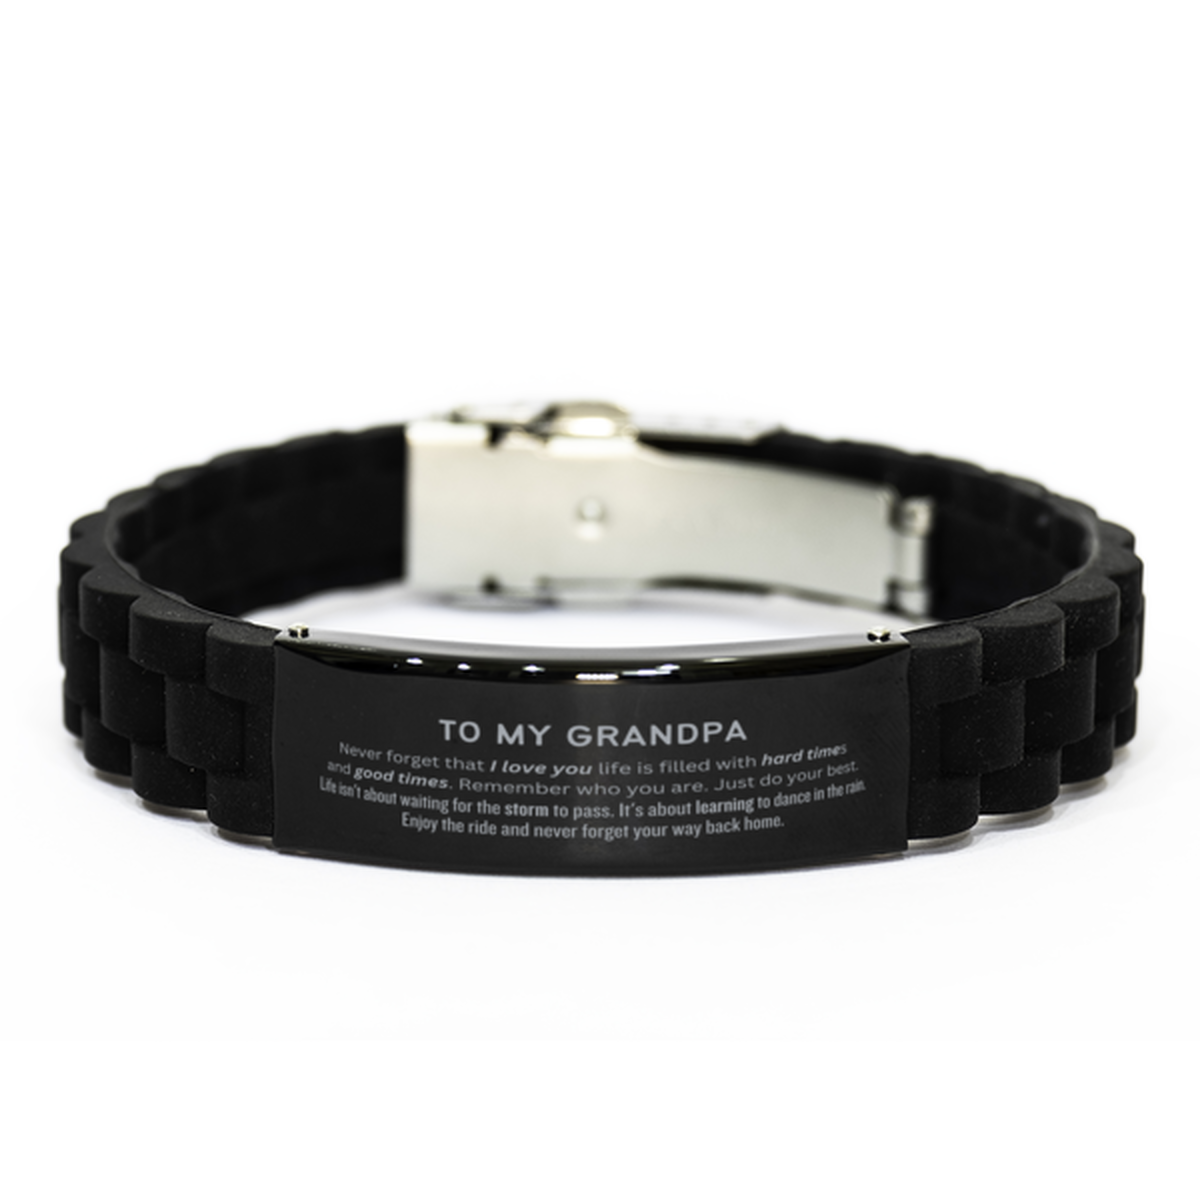 Christmas Grandpa Black Glidelock Clasp Bracelet Gifts, To My Grandpa Birthday Thank You Gifts For Grandpa, Graduation Unique Gifts For Grandpa To My Grandpa Never forget that I love you life is filled with hard times and good times. Remember who you are.